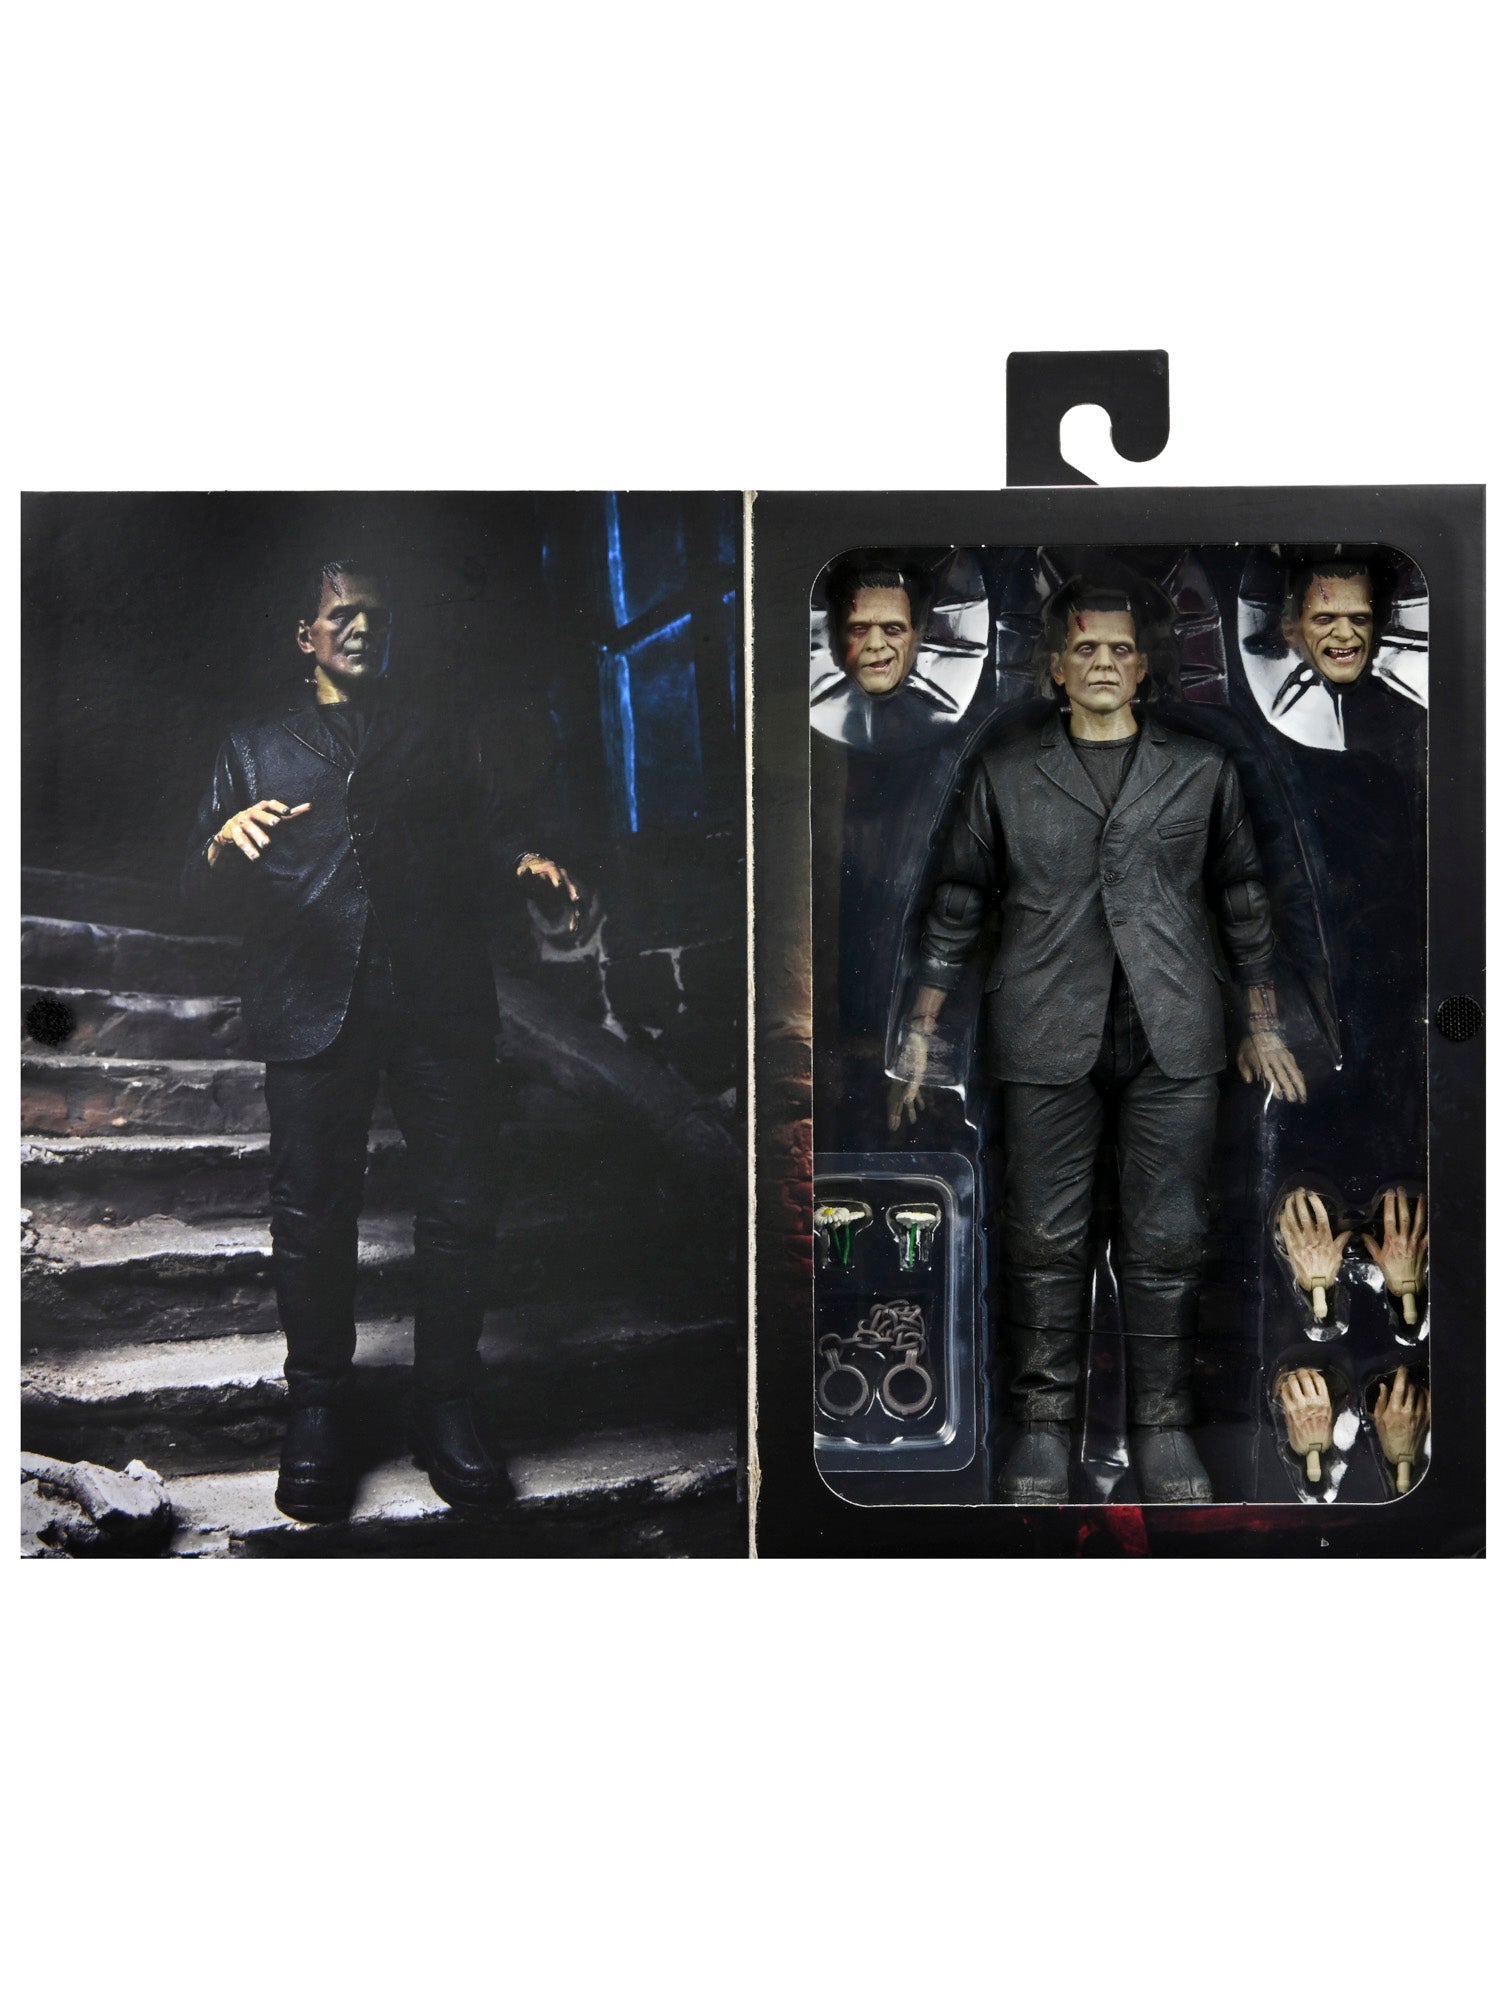 NECA - Universal Monsters - 7" Scale Action Figure - Ultimate Frankenstein's Monster (Color) - costumes.com